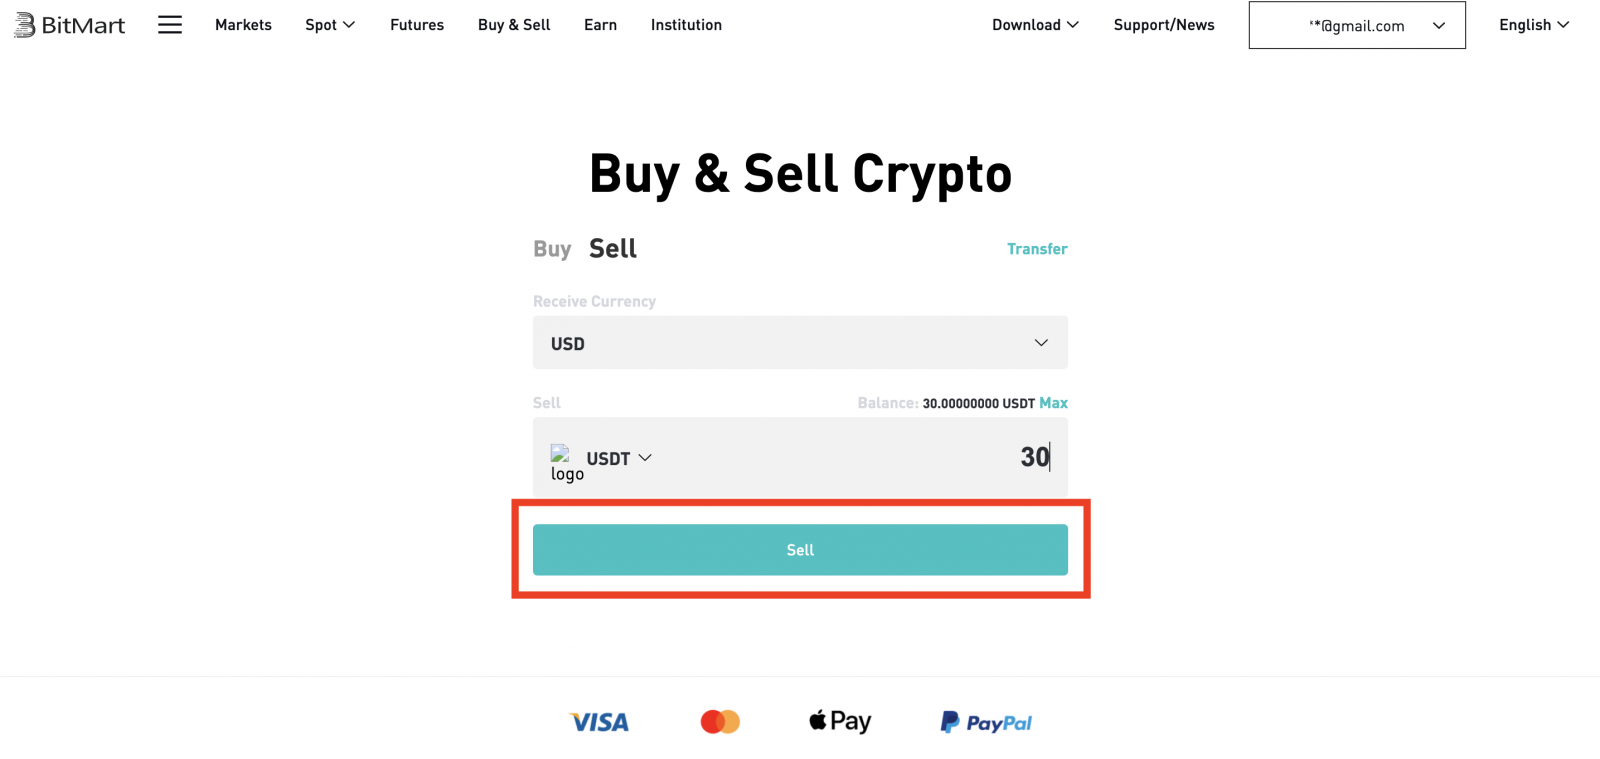 How To Sell Coins With MoonPay in BitMart